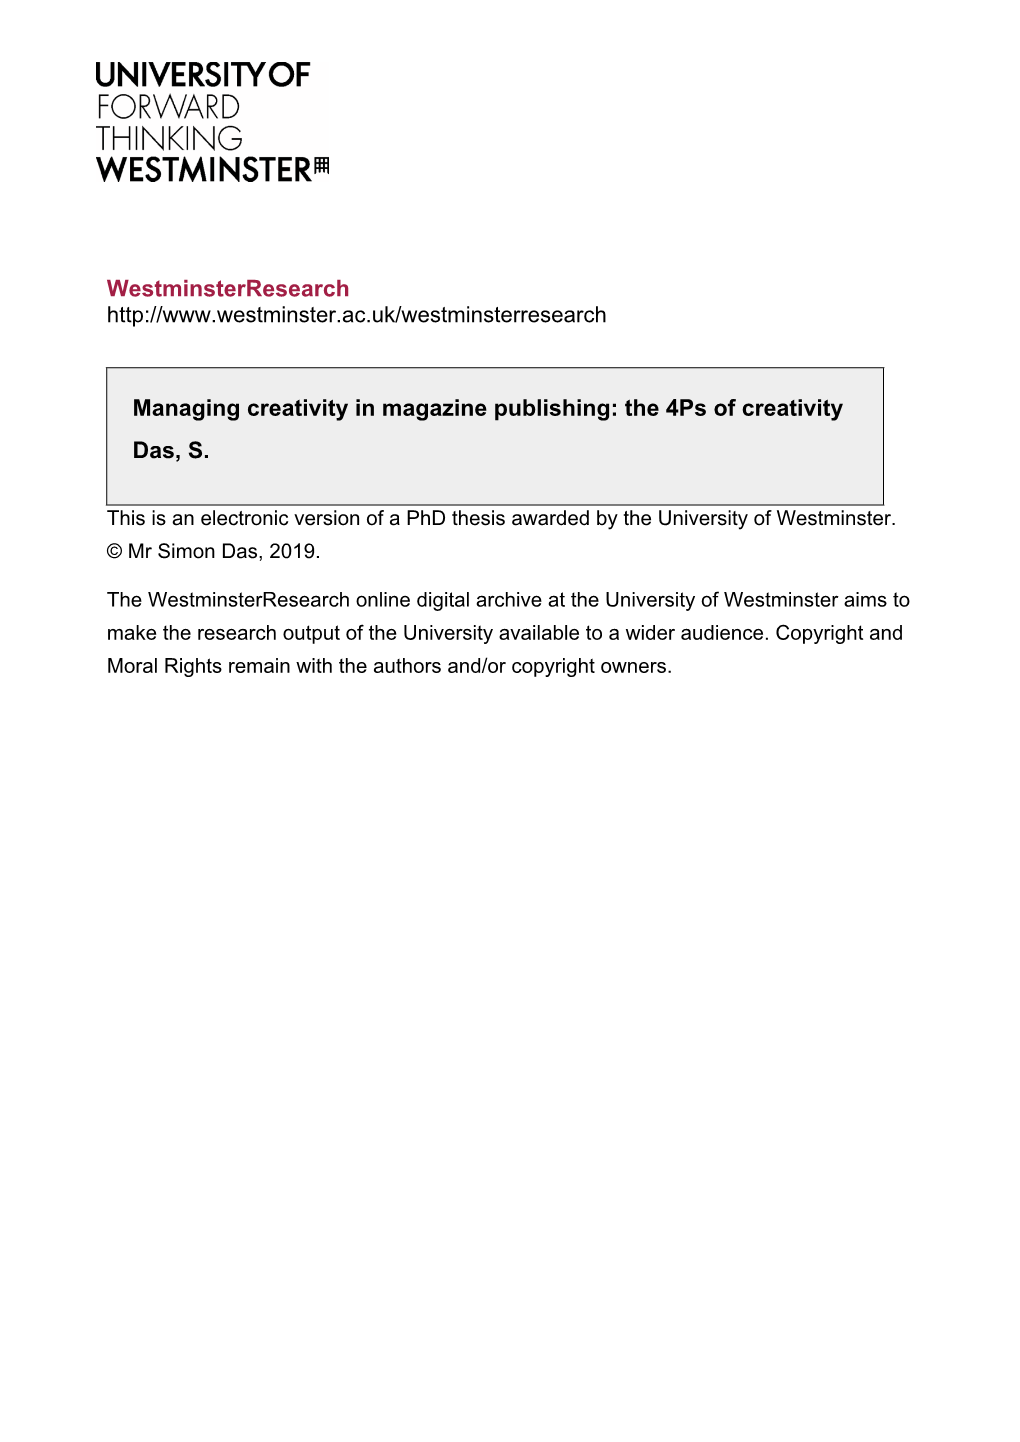 Westminsterresearch Managing Creativity in Magazine Publishing